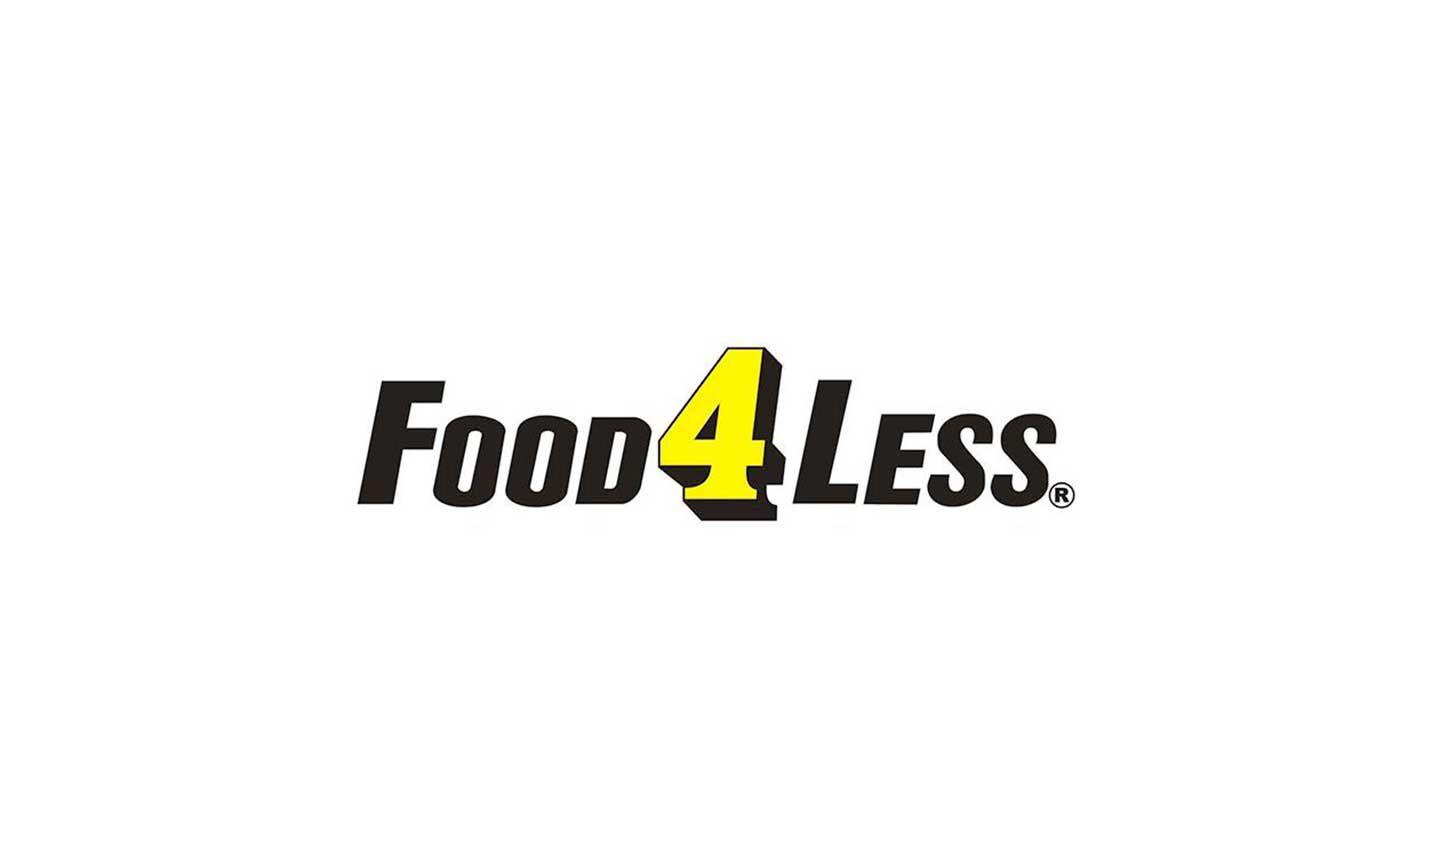 Shoppers Logo - Food 4 Less Brings Blockchain To Shoppers With New Soccer Promo